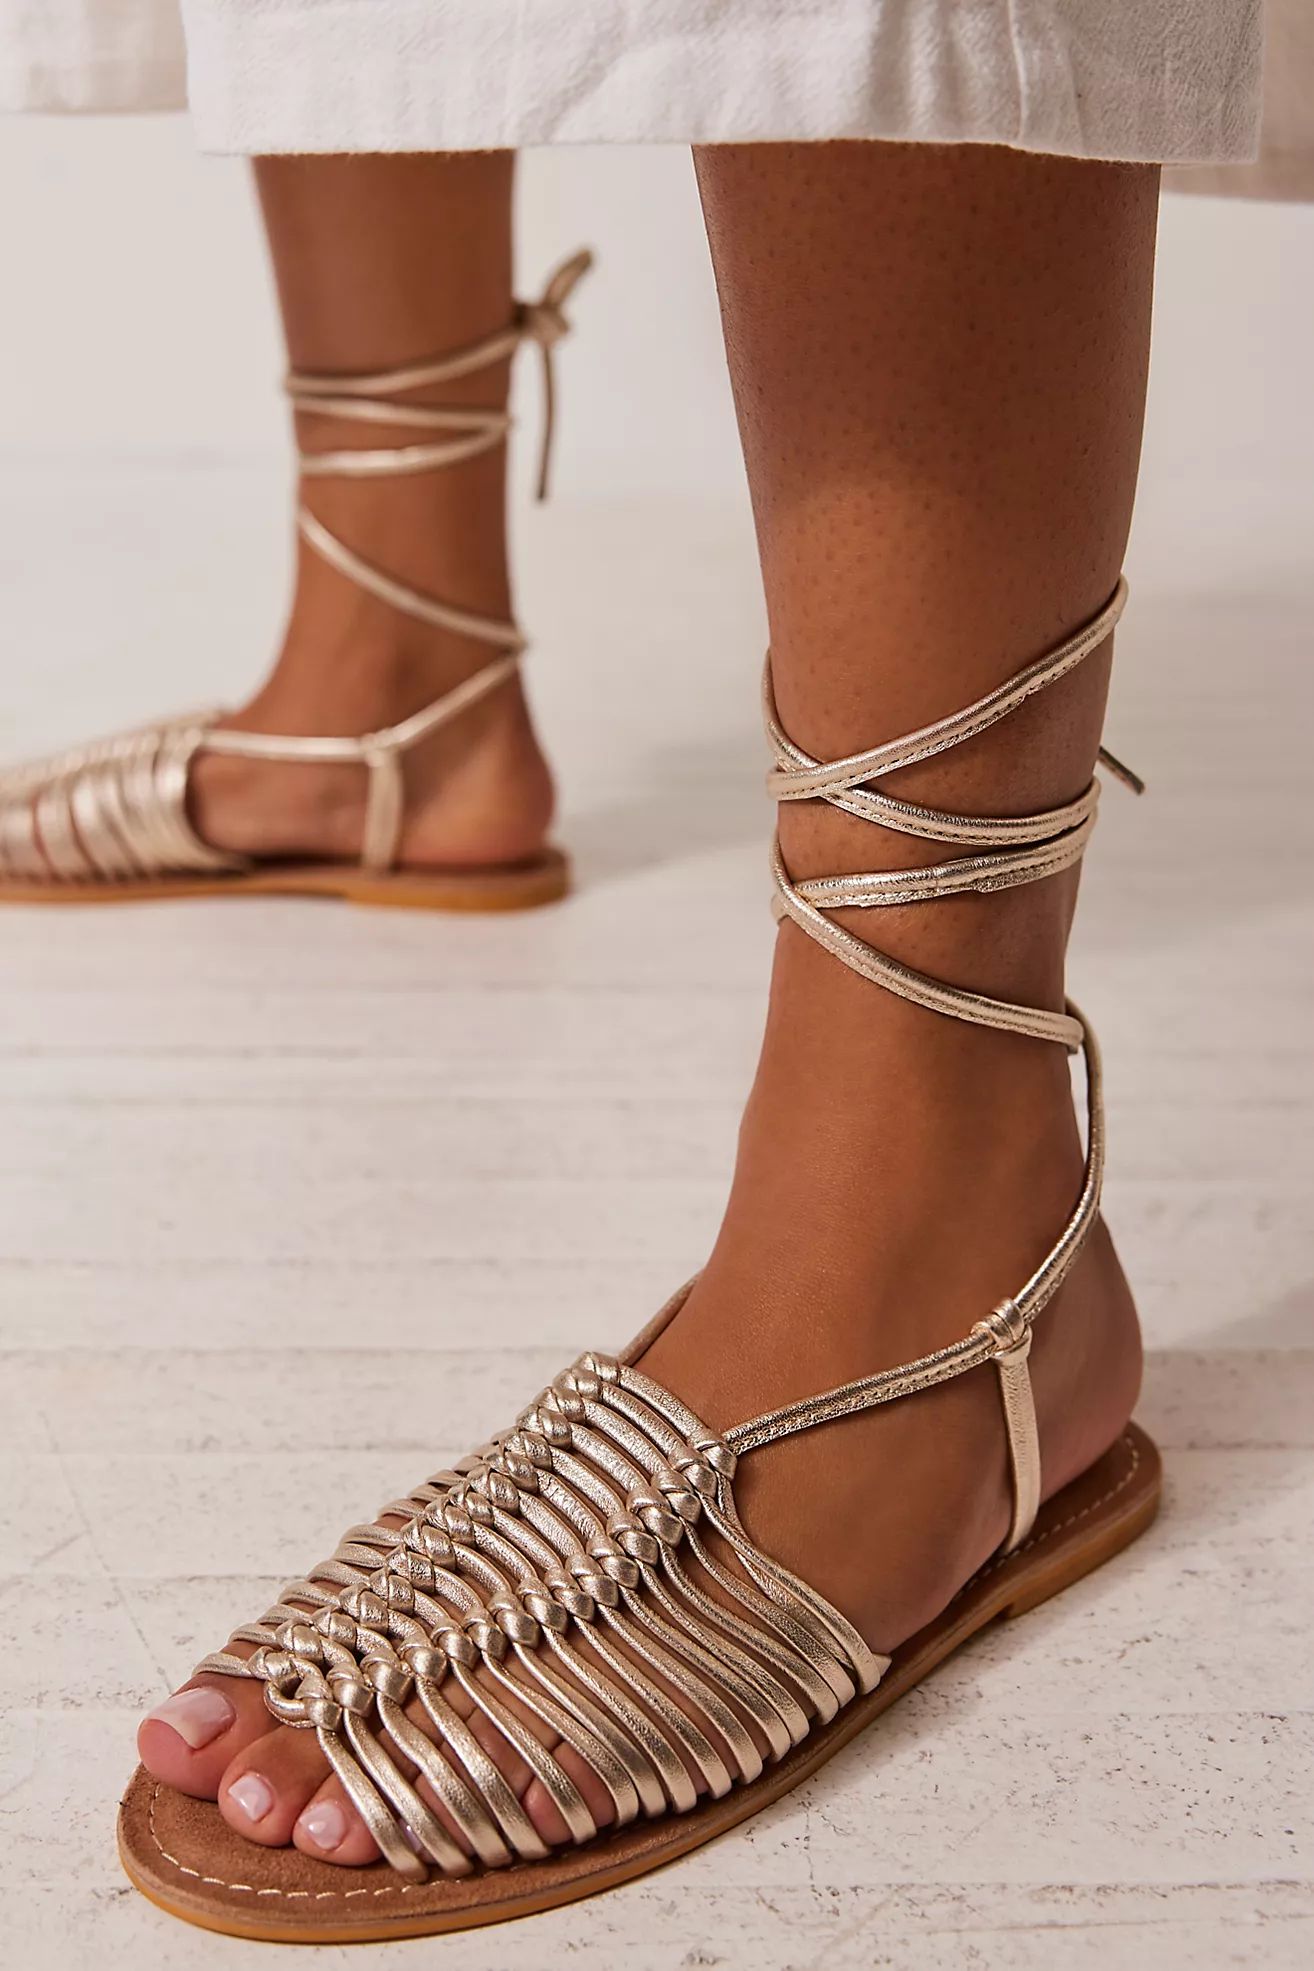 Similar Items

               
            Cami Huarache Wrap Sandals
            
              ... | Free People (Global - UK&FR Excluded)